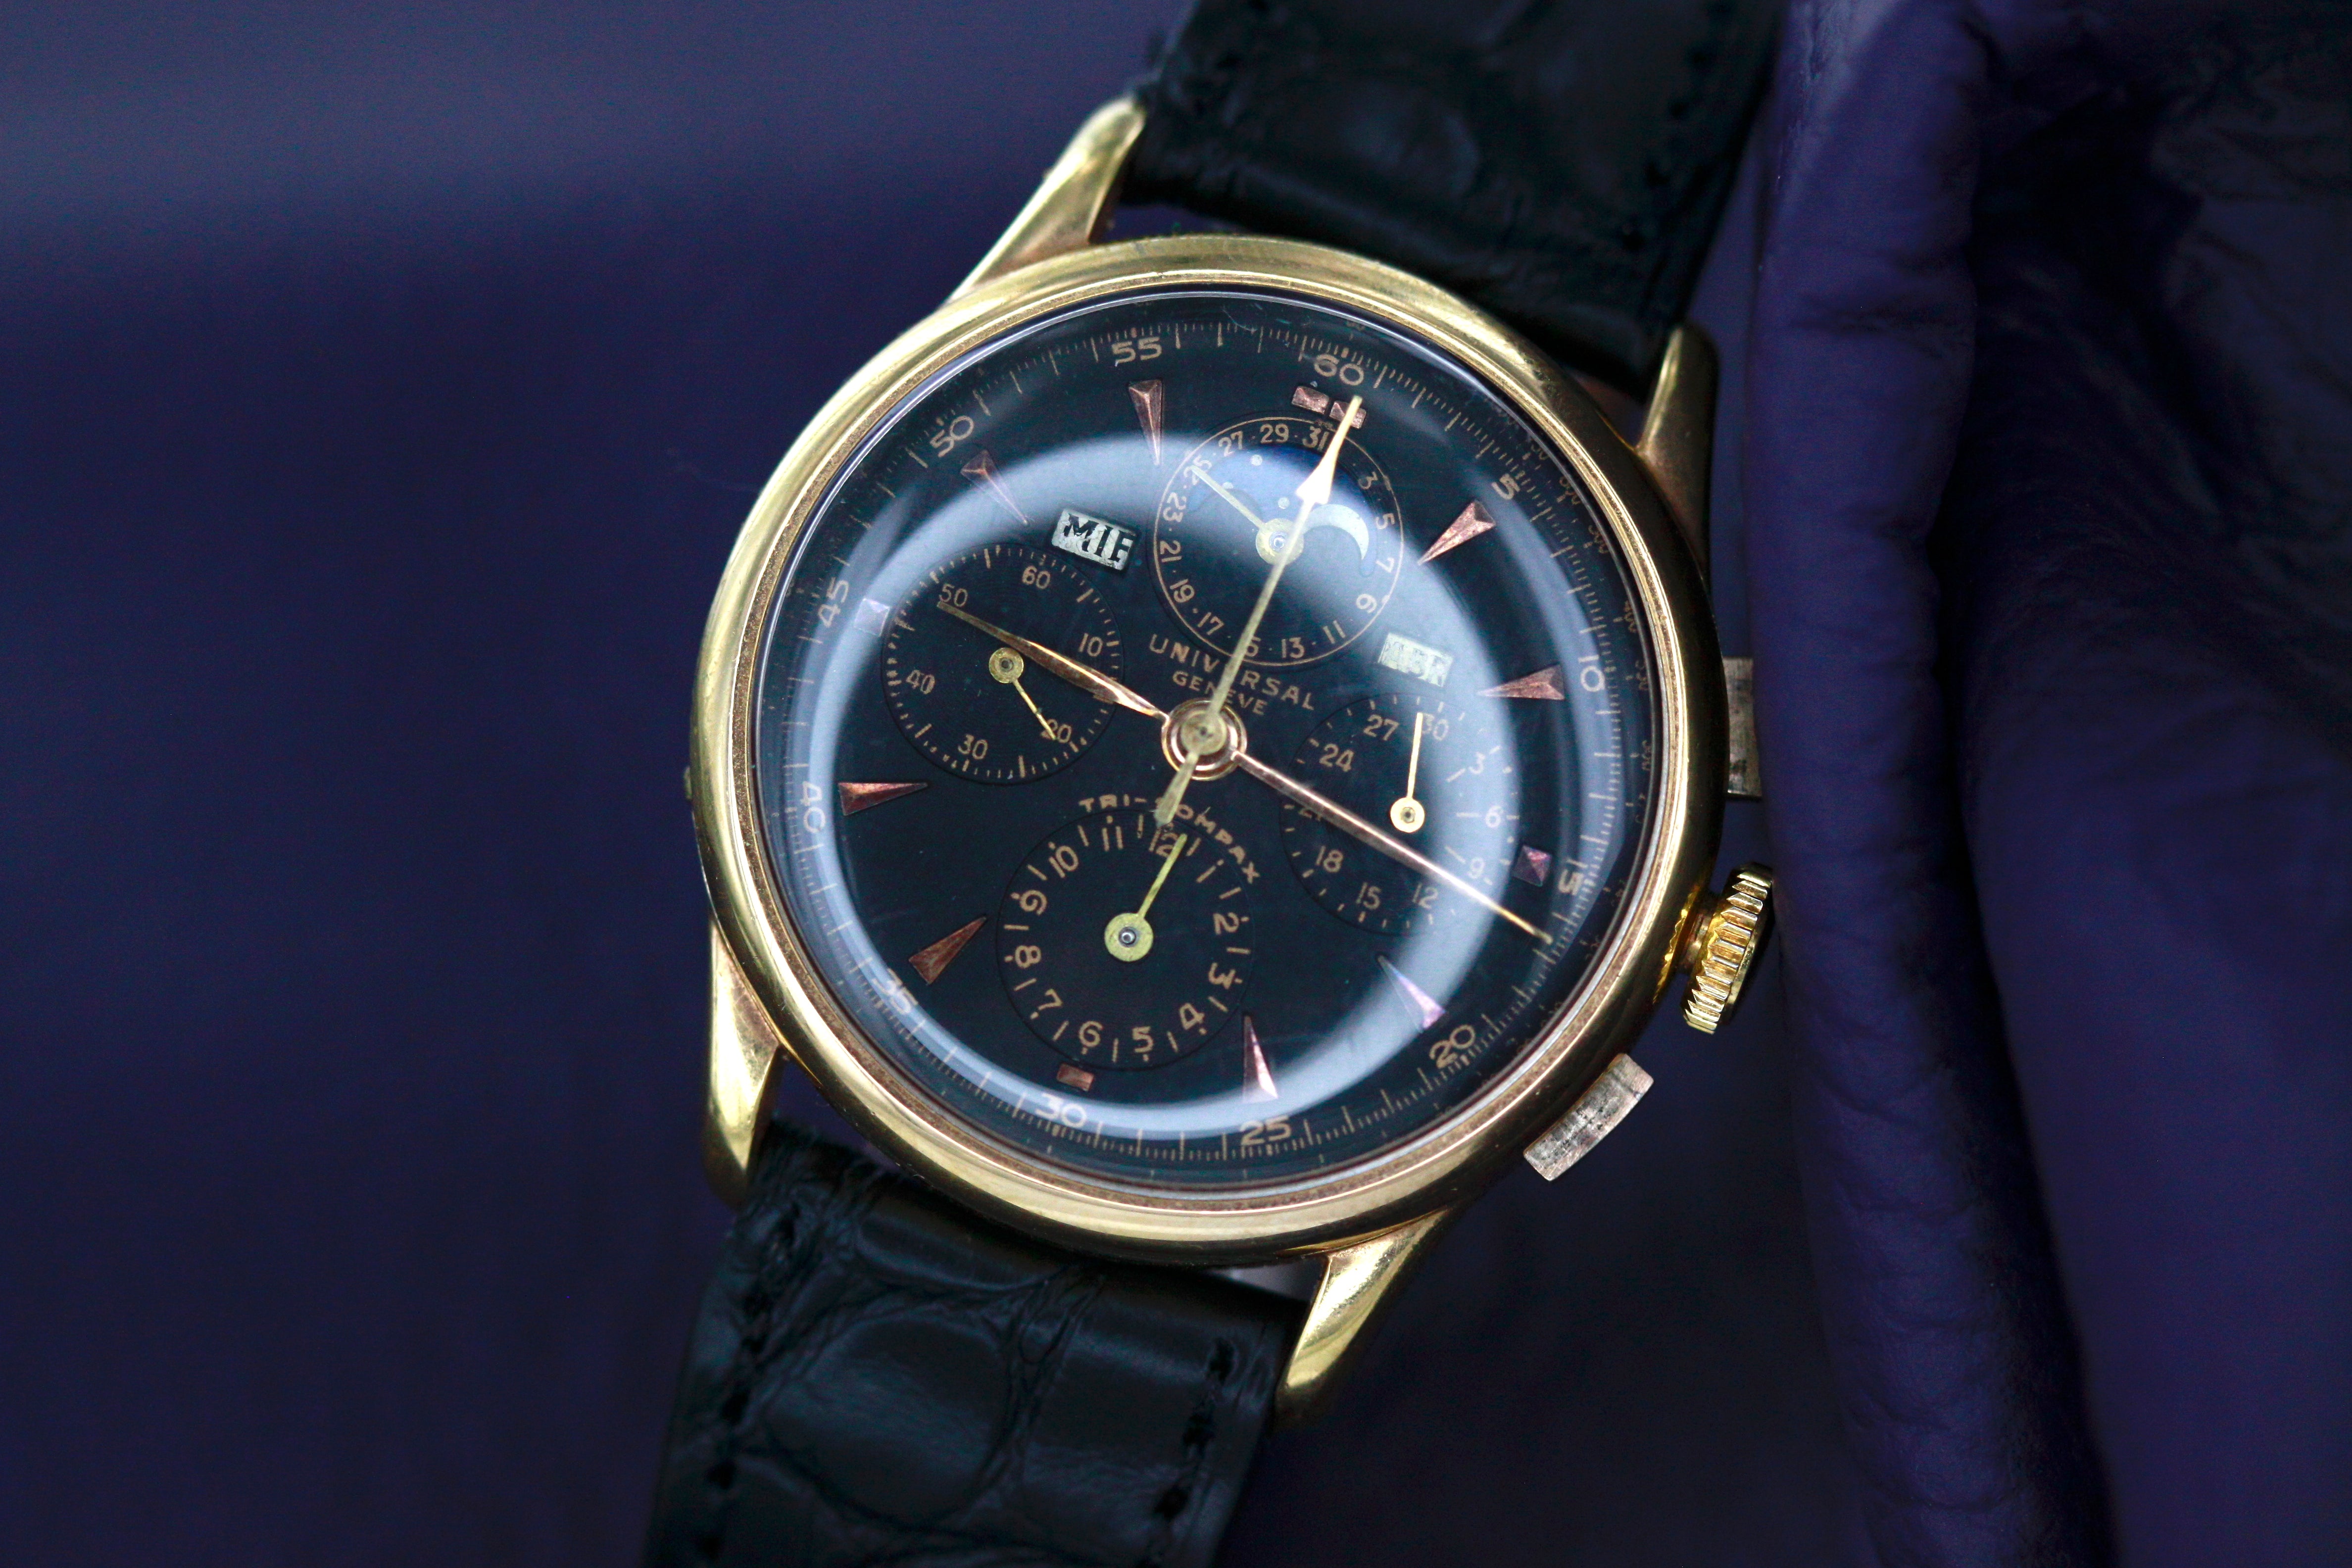 UNIVERSAL TRICOMPAX BLACK dial from the 50s - Gold steel case.